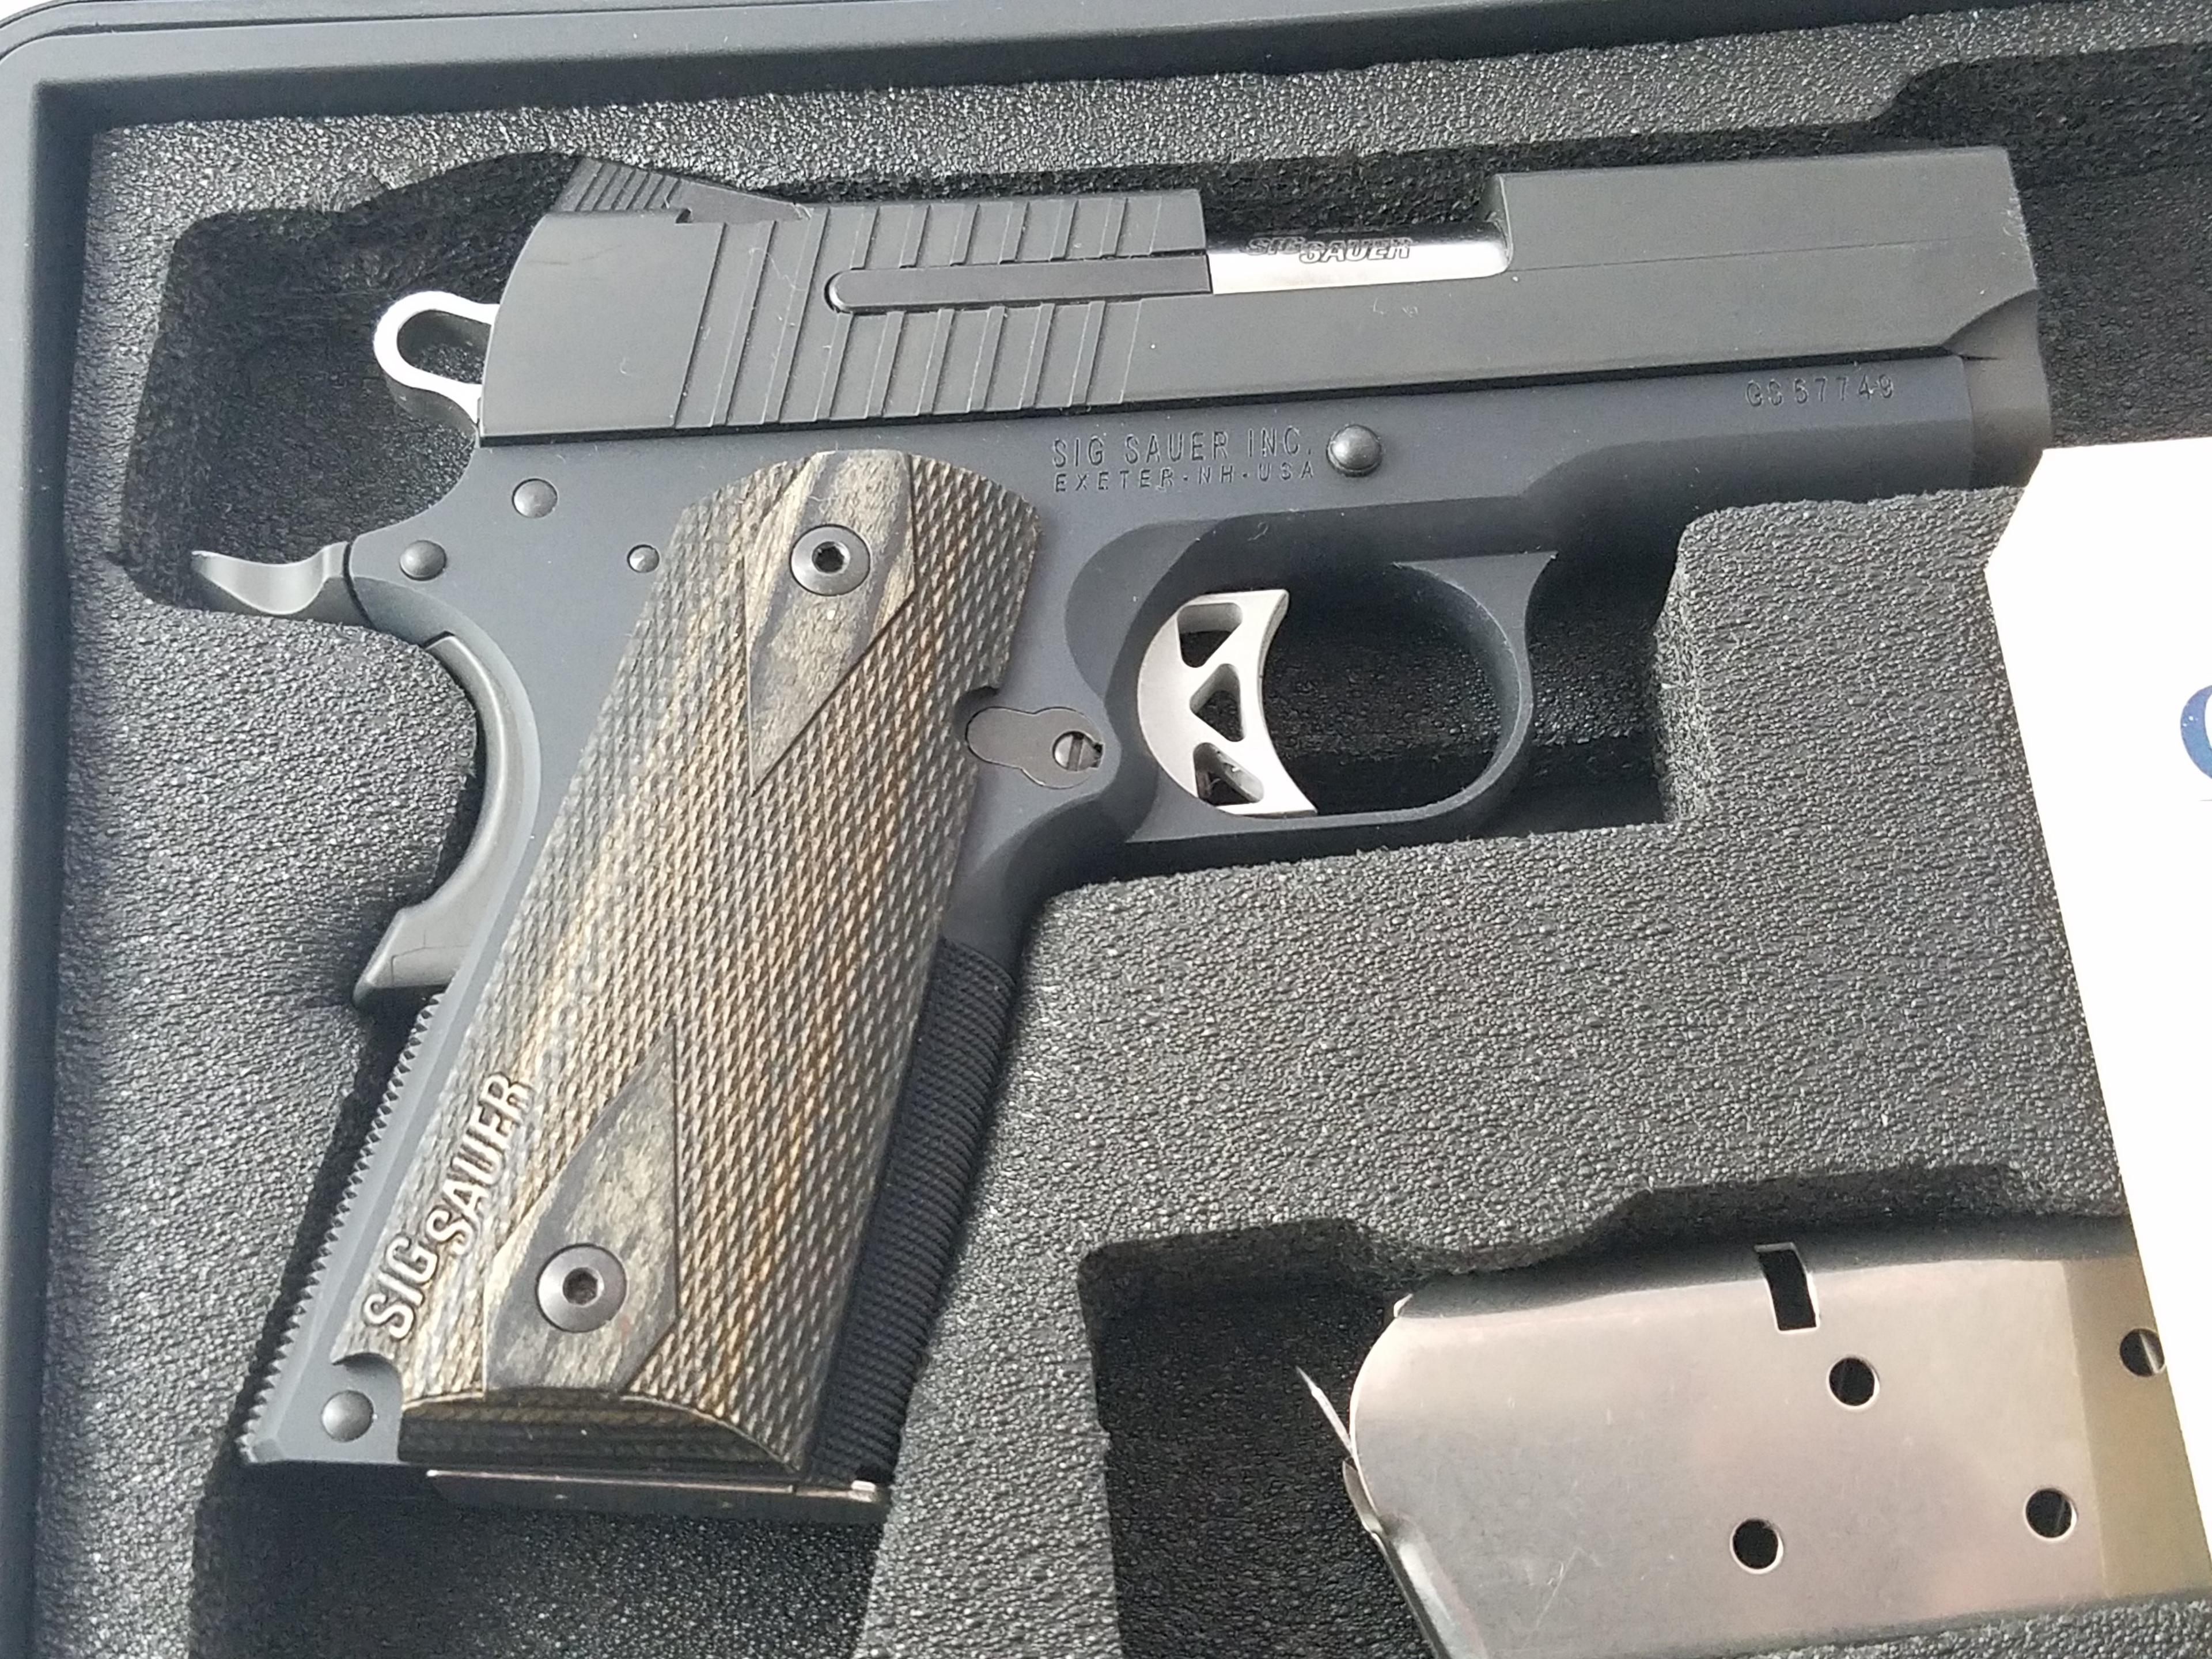 "Sig 1911 .45 cal ultra compact 2 mags s/nGS577492089